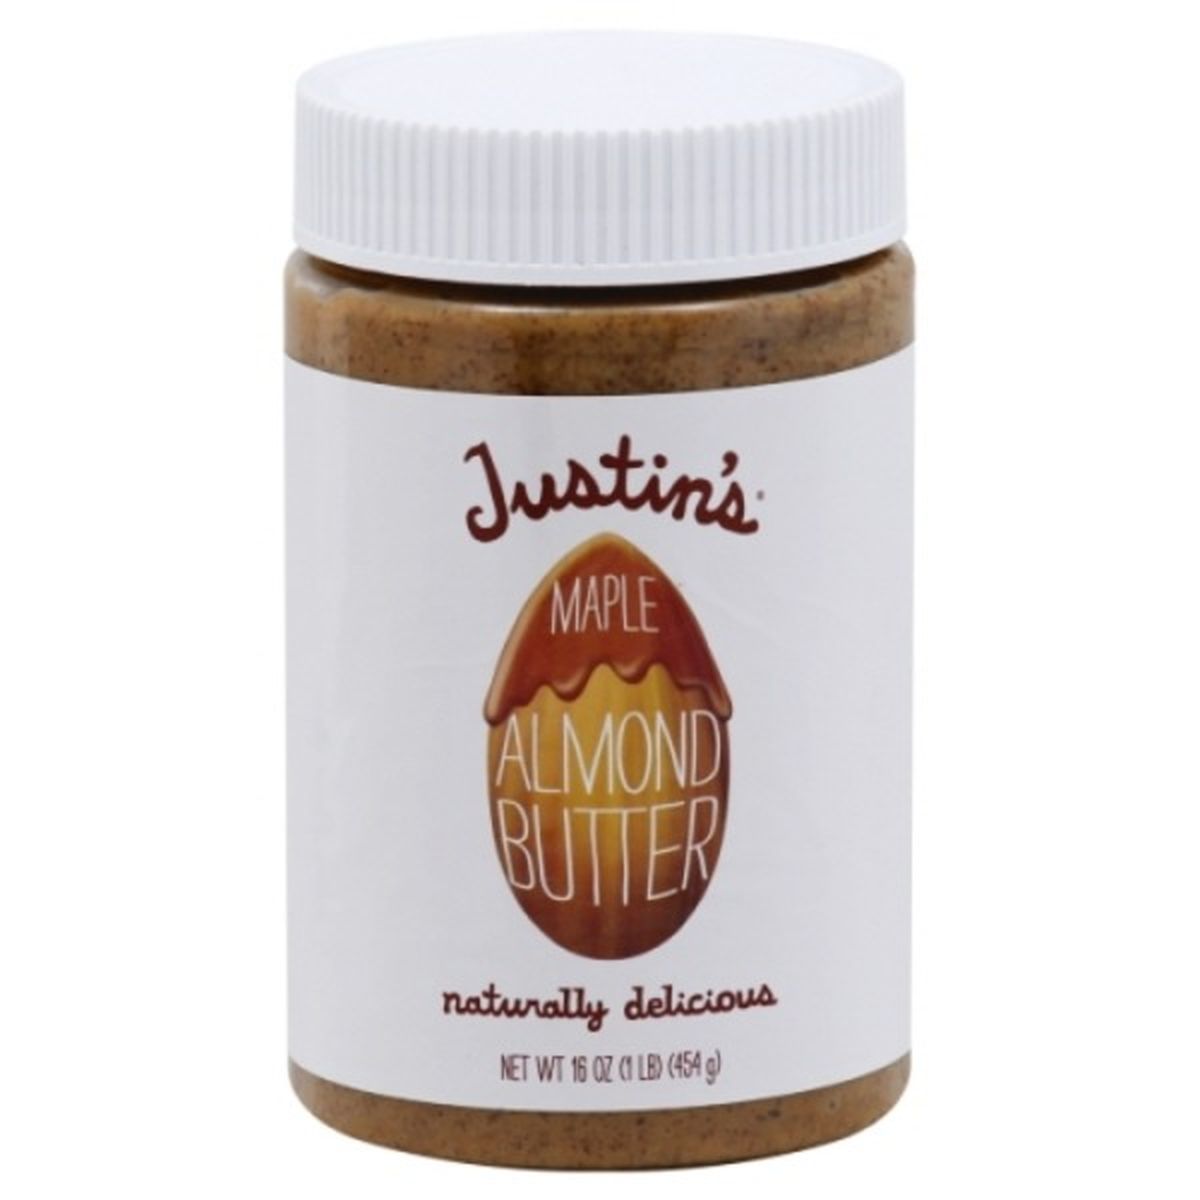 Calories in Justin's Almond Butter, Maple